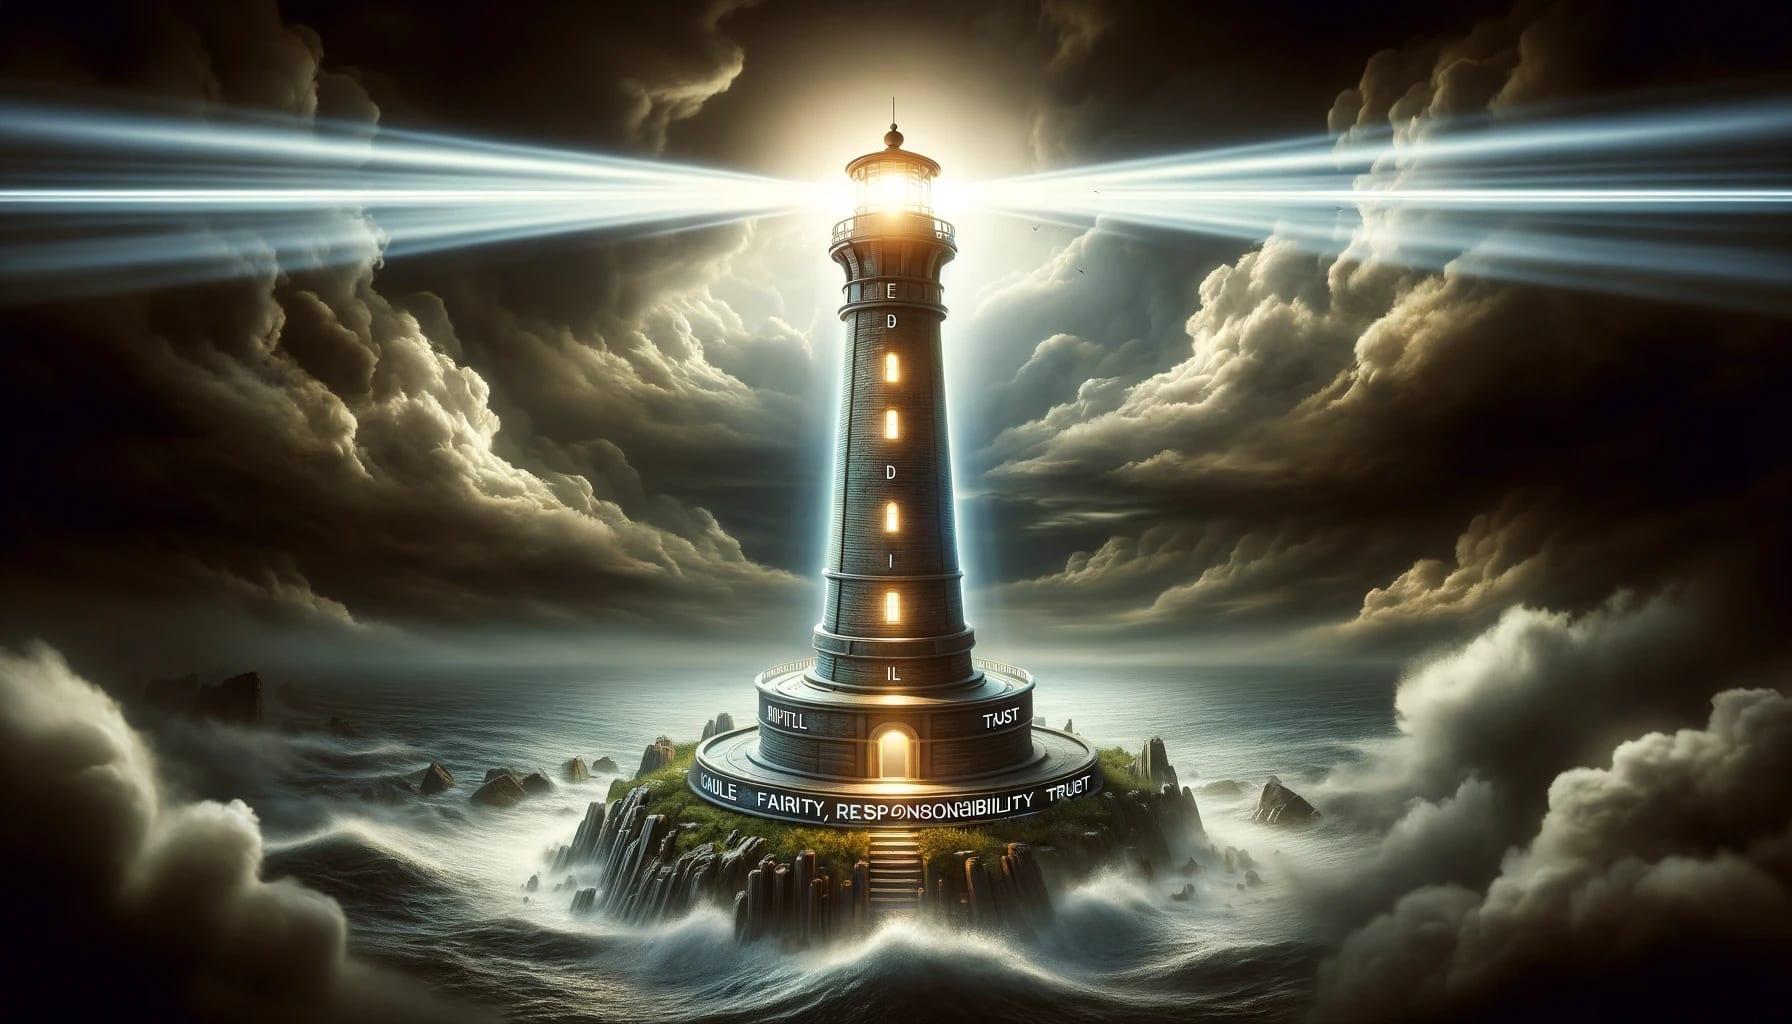 a towering lighthouse, standing resilient on a cliff overlooking a stormy sea, symbolizing guidance and safety in the tumultuous world of AI advancement. The lighthouse beam, powered by a core of glowing ethical values, cuts through the fog, illuminating a path towards ethical AI development.